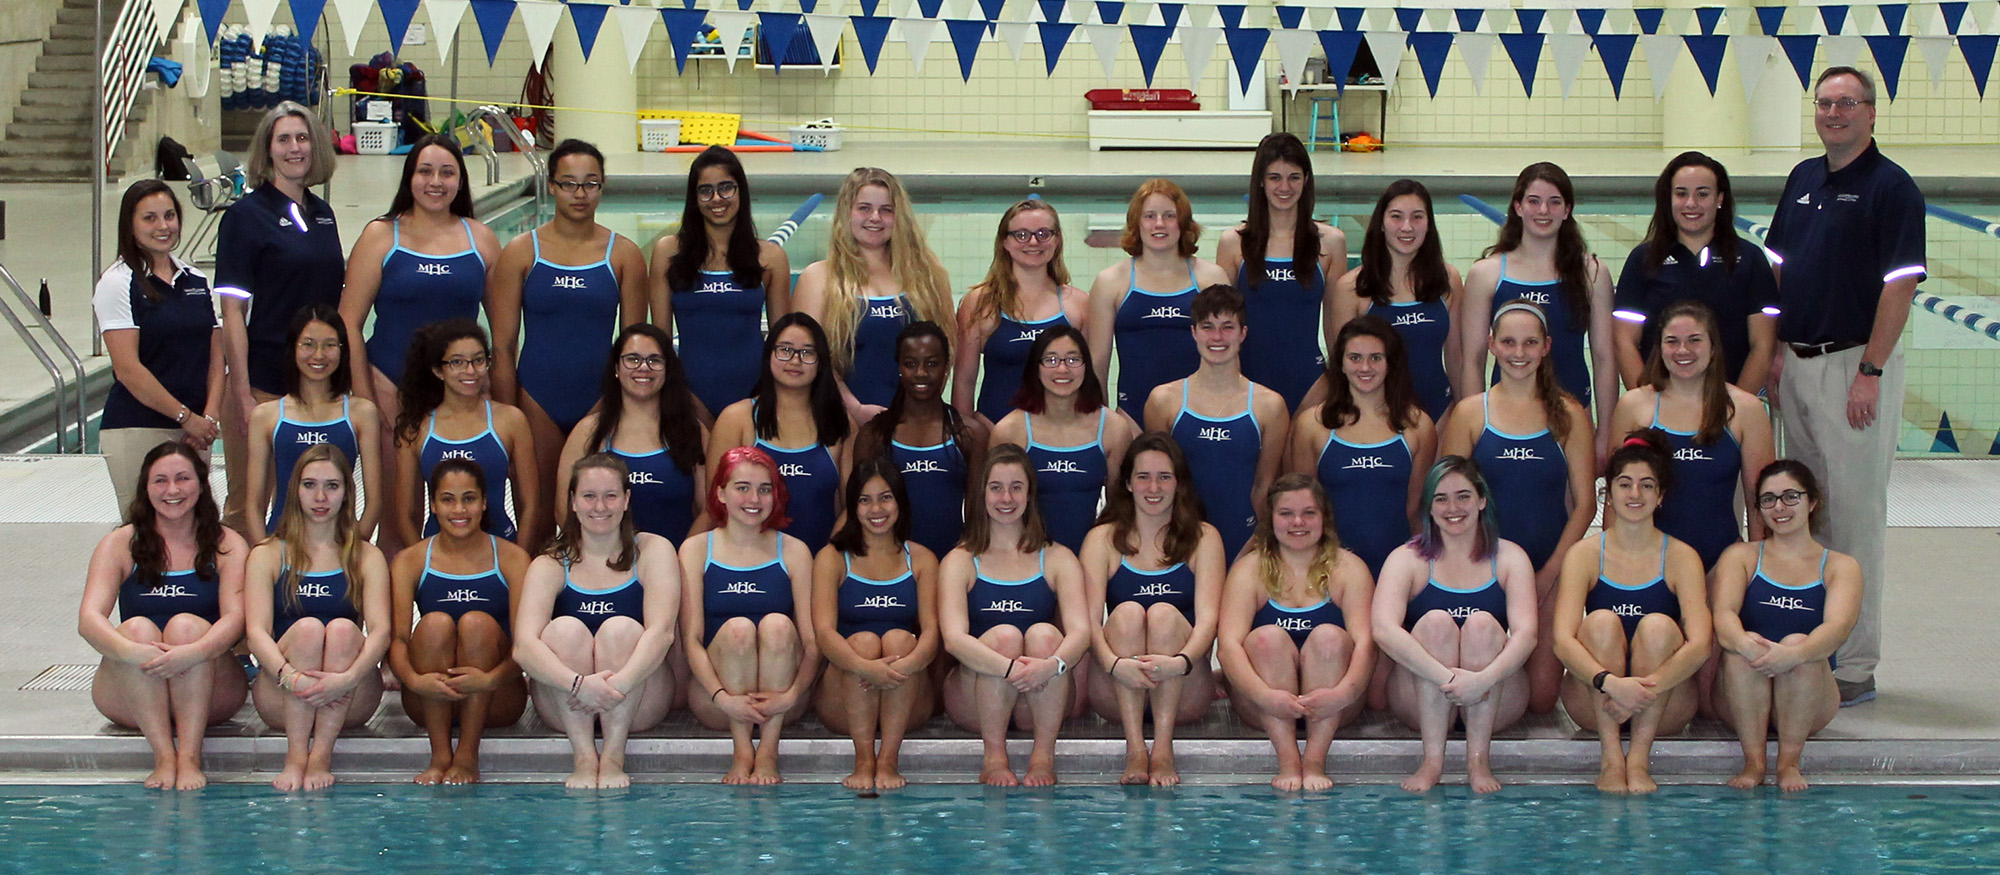 Team photo of the 2018-19 Swimming & Diving Team.